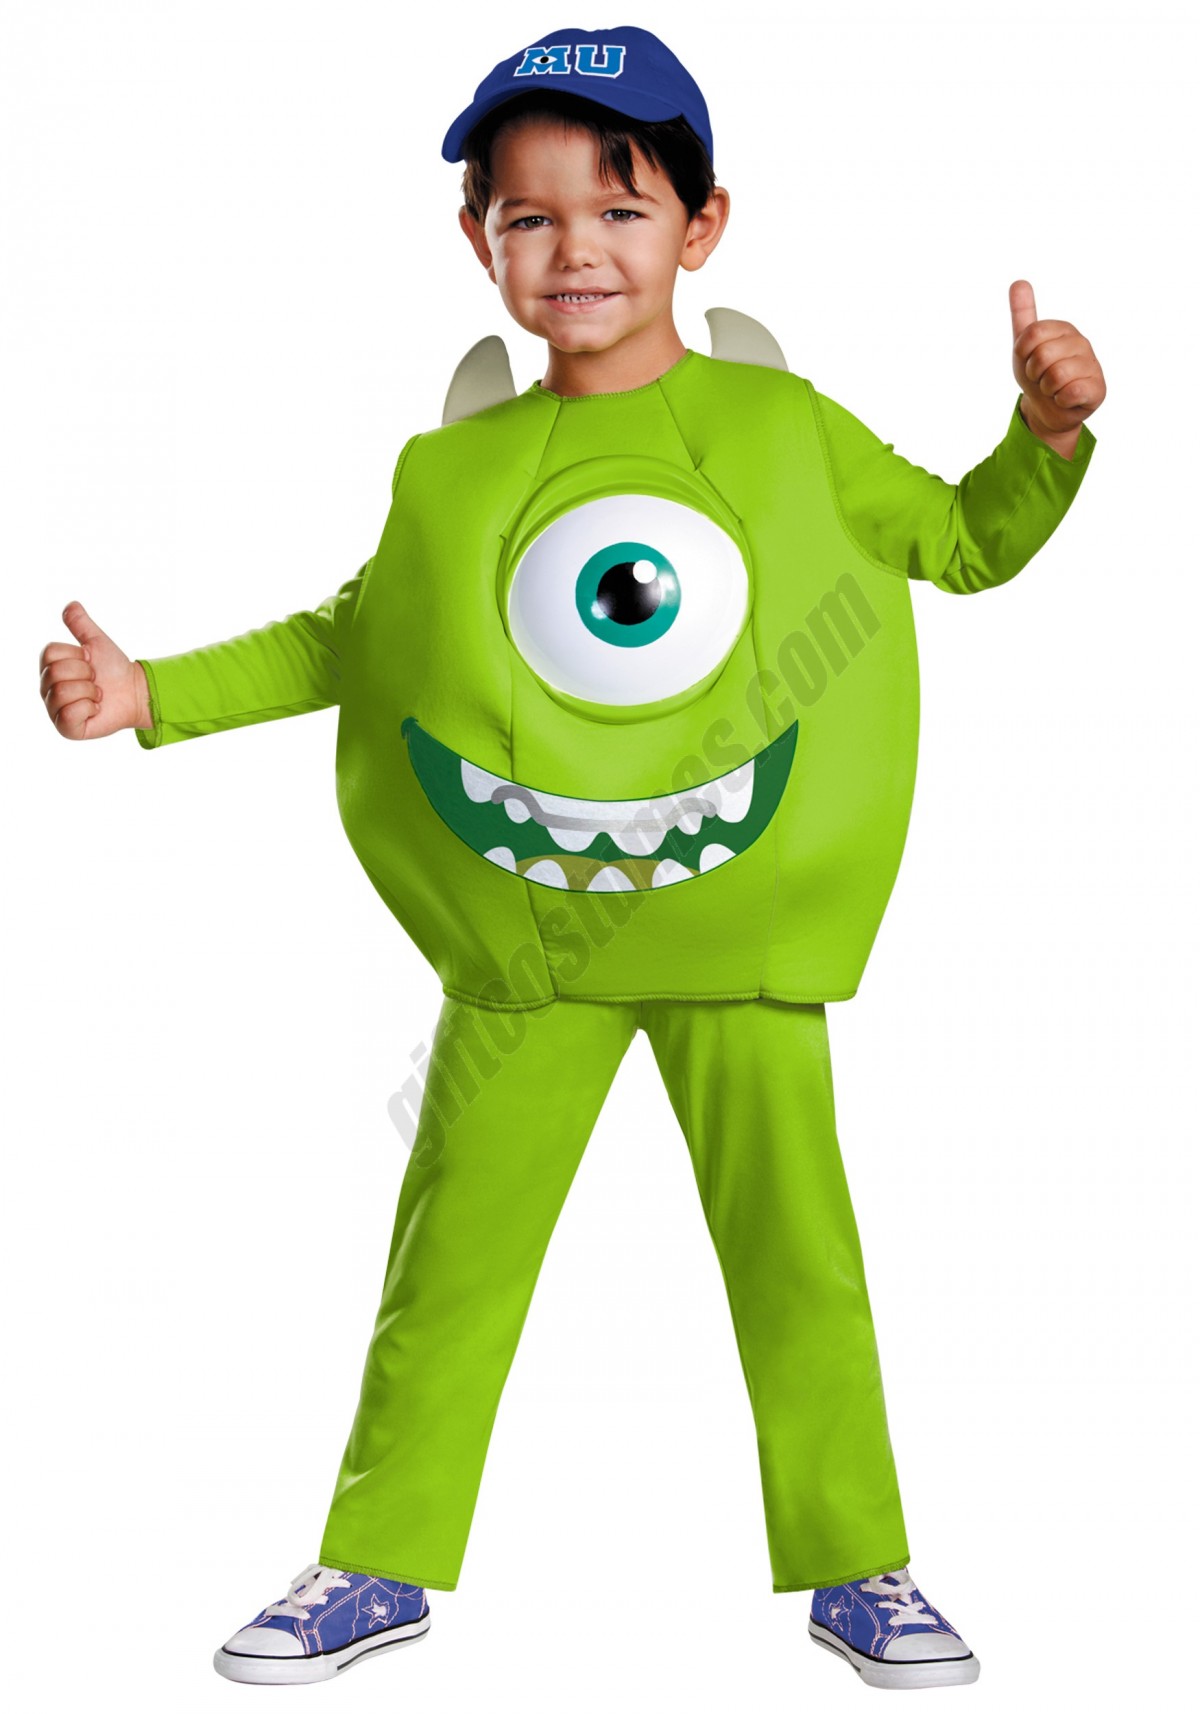 Mike Toddler Deluxe Costume Promotions - -0